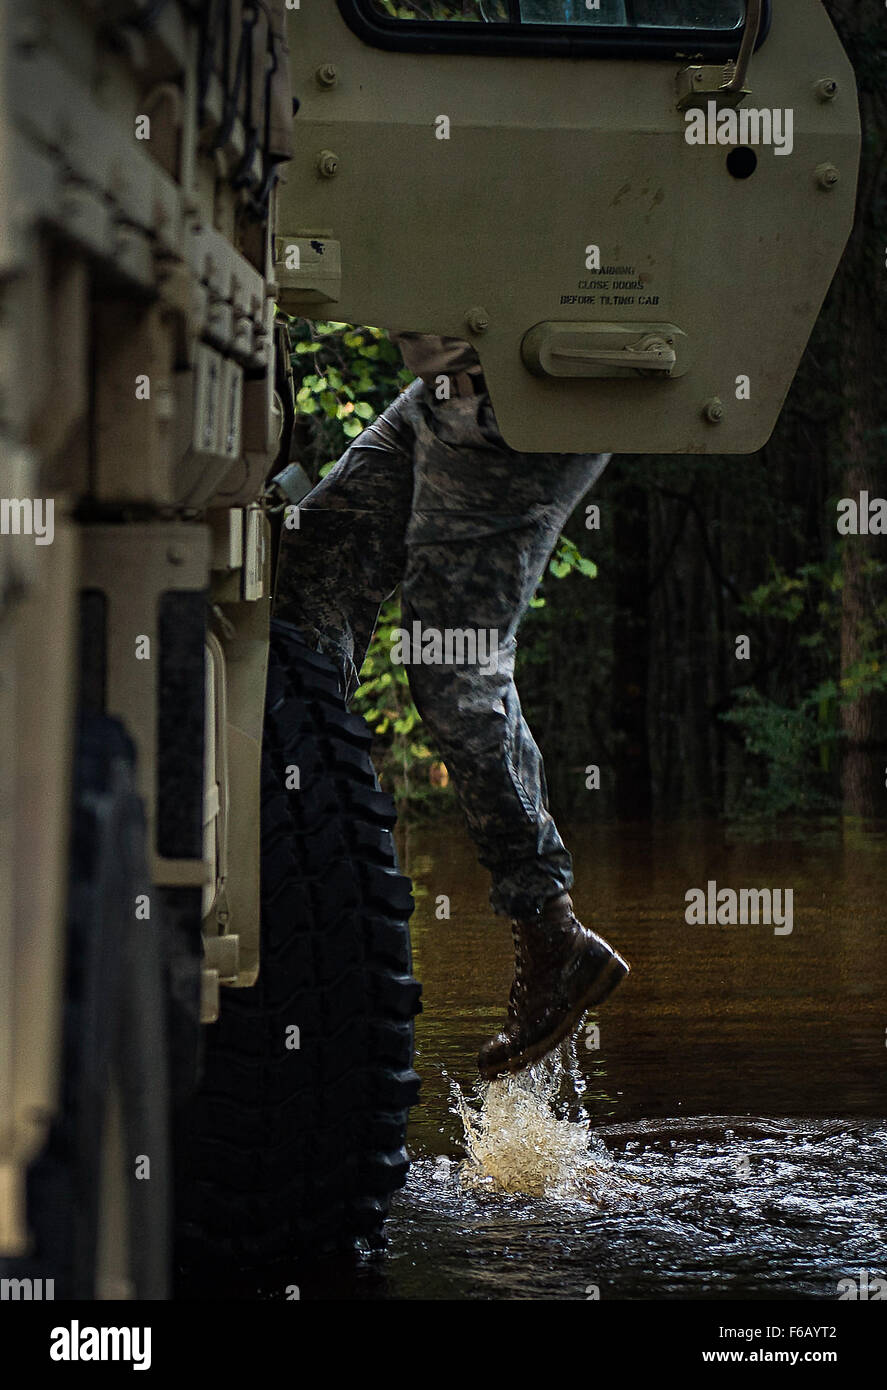 Flood water from the Edisto River quickly rose during high tide, while South Carolina National Guard Soldiers helped residents protect their property Oct. 9, 2015 in Parkers Ferry, S.C. The historic flooding, which has caused damage, destruction and death throughout South Carolina, has been the result of record-setting rainfall during what is being considered a 1,000-year event delivered by Hurricane Joaquin as it traveled up the East Coast. (U.S. Air Force photo by Staff Sgt. Perry Aston/Released) Stock Photo